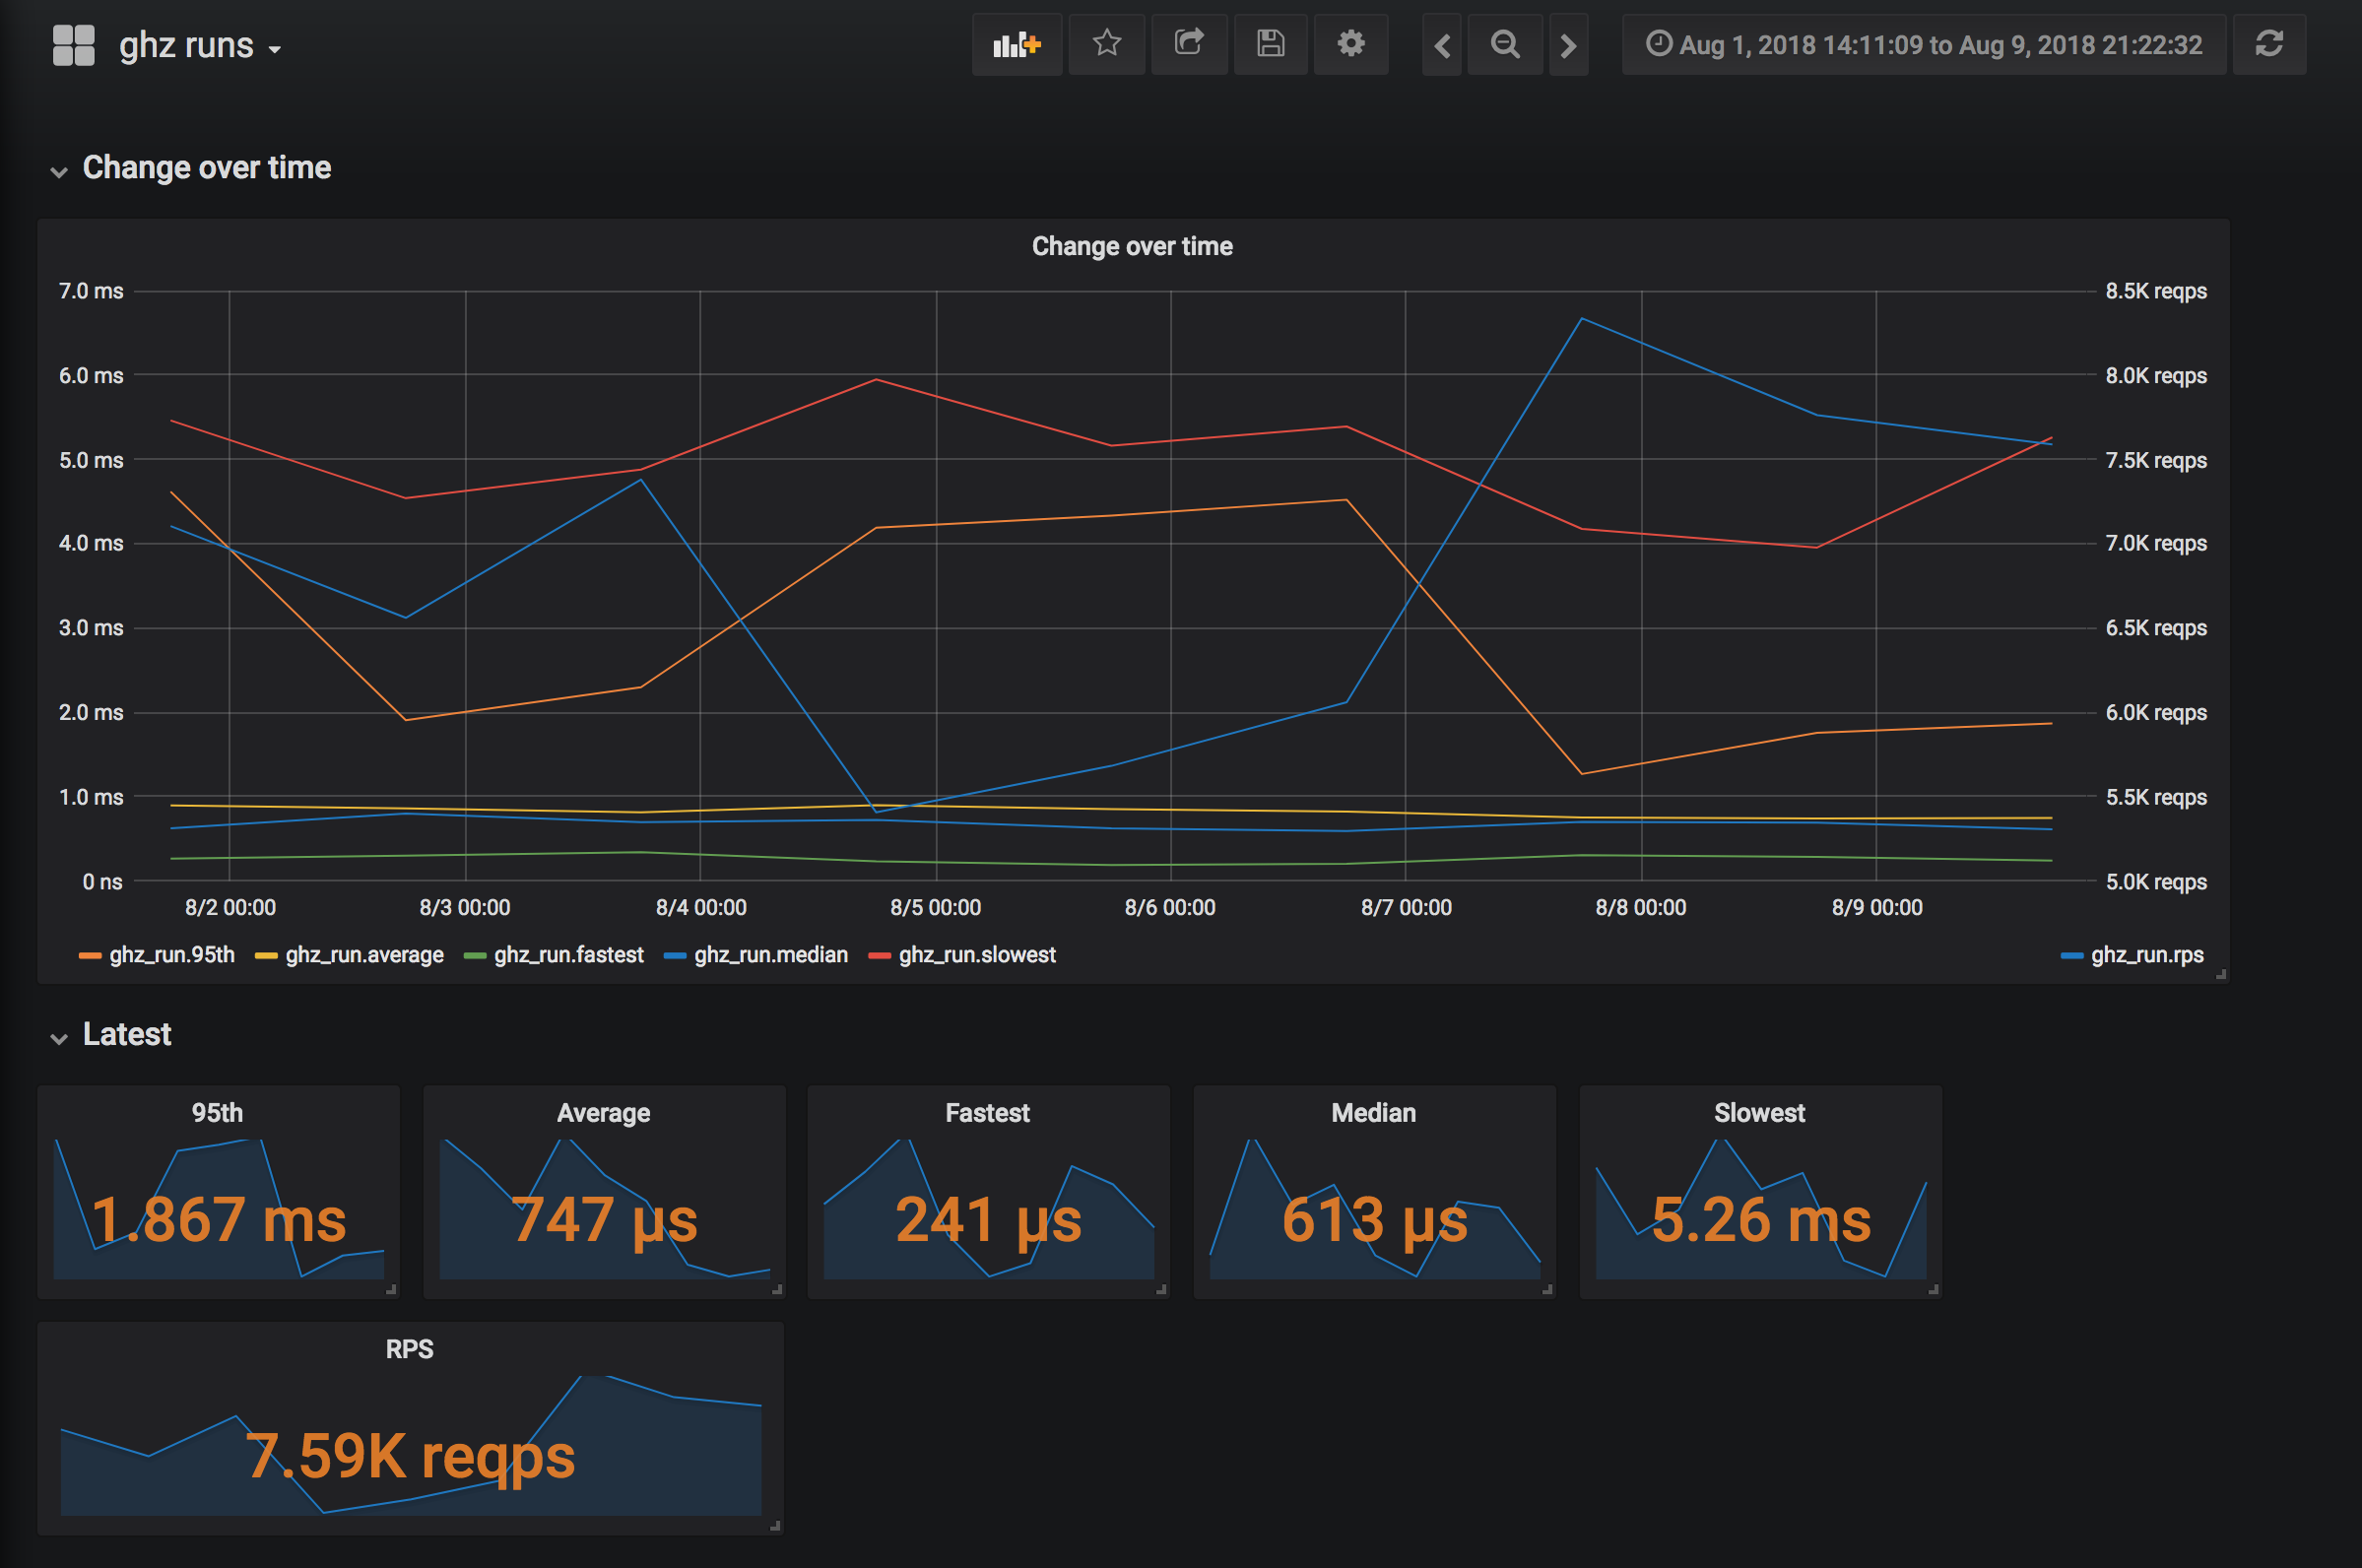 influx-summary-grafana-dashboard.png